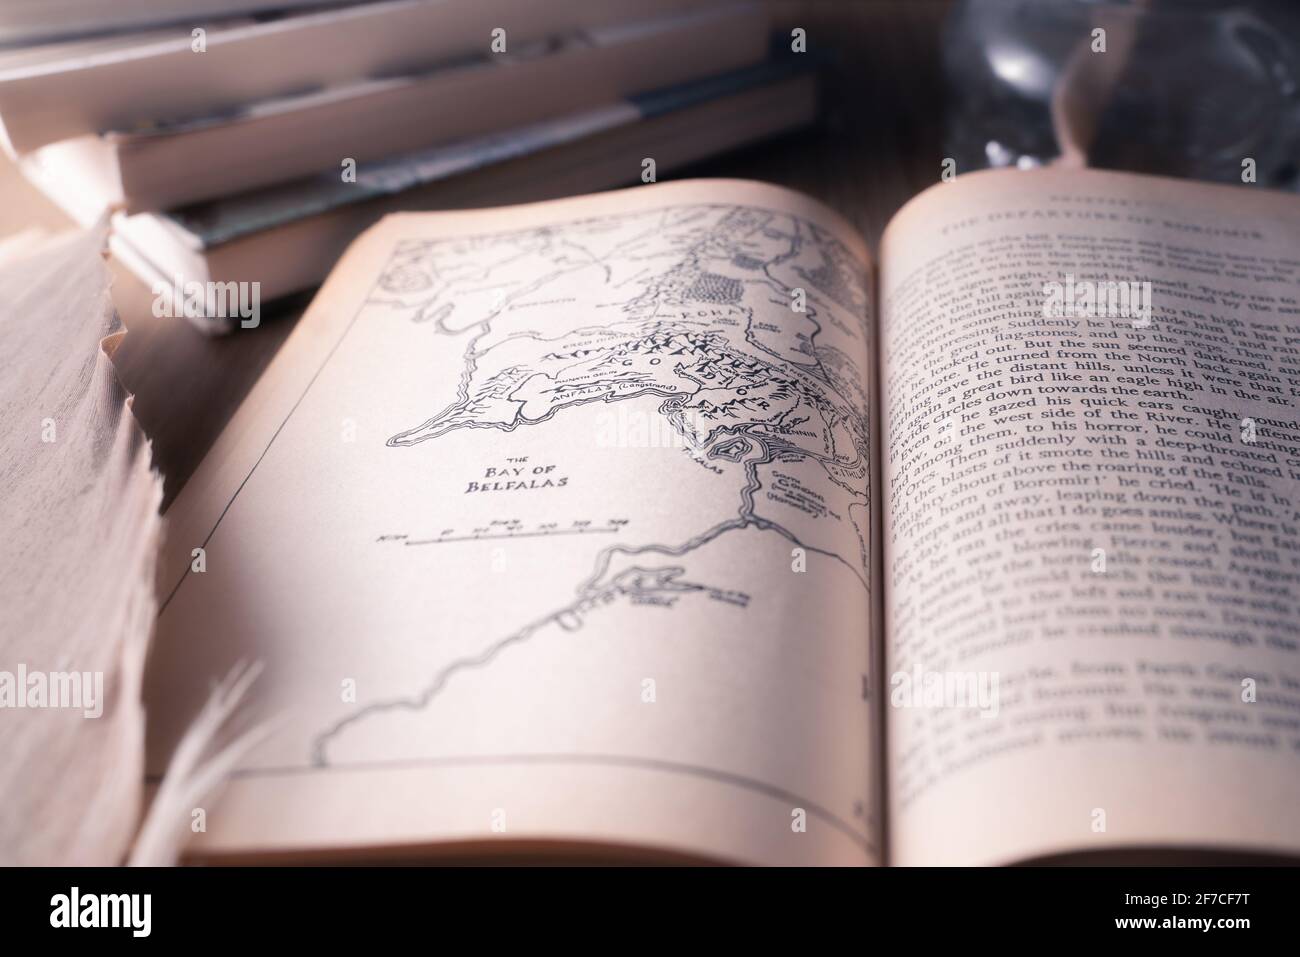 Celadna, Czechia - 04.03.2021: Vintage paperback edition of Tolkien's Lord Of The Rings open on the page with Middle-earth map focused on Bay of Belfa Stock Photo